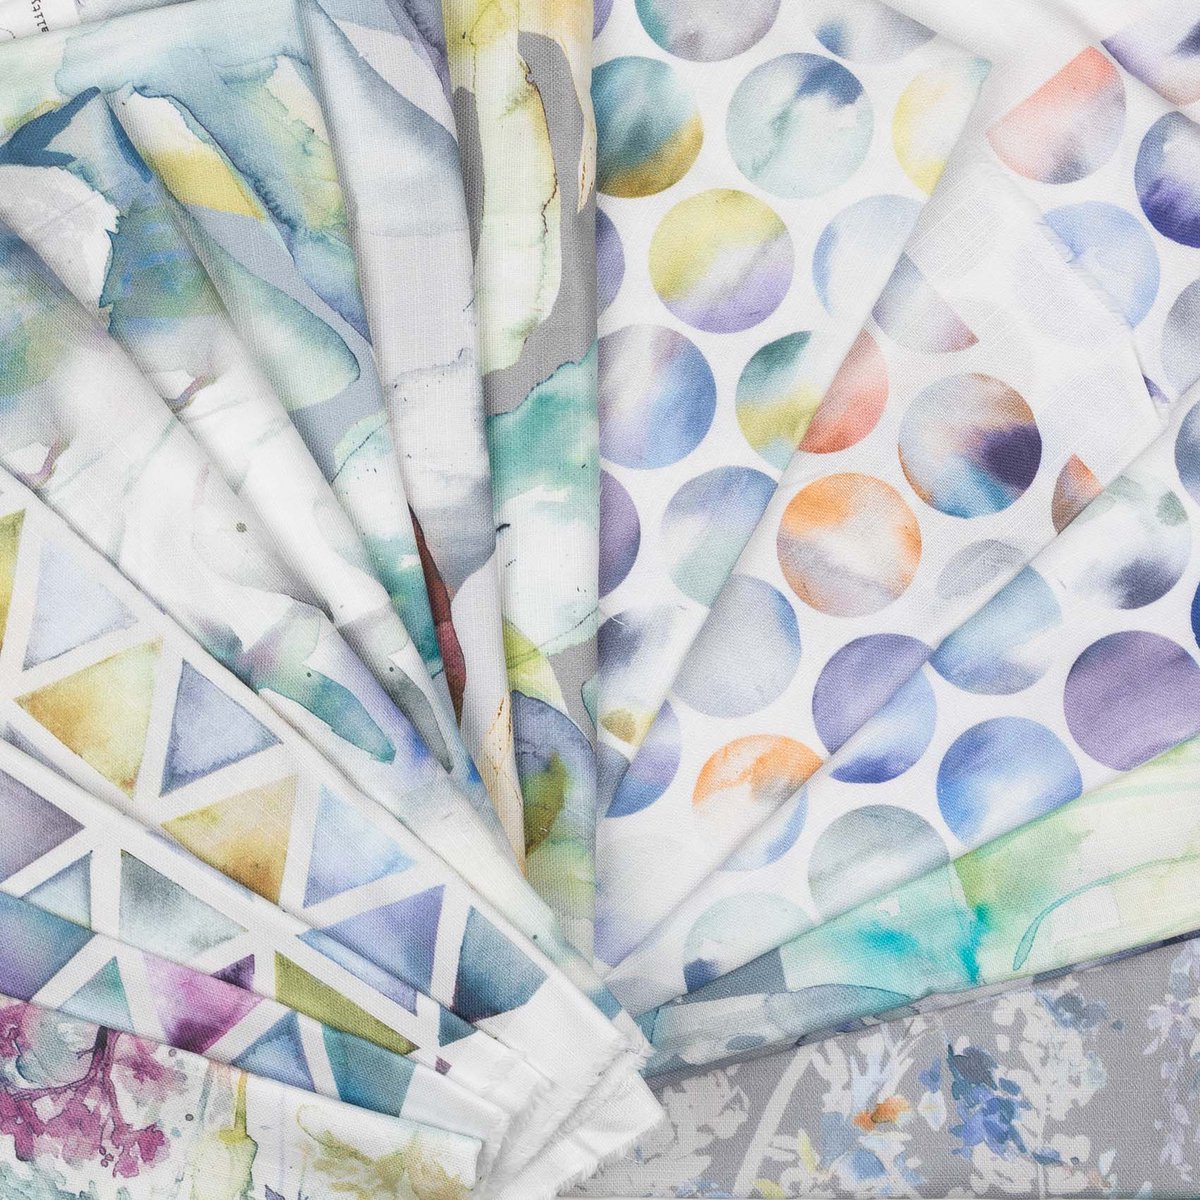 Shop our last remaining remnant fabric bundles! Perfect for an array sewing projects and each bundle is totally unique✨Shop now at voyageoutlet.com/collections/re…